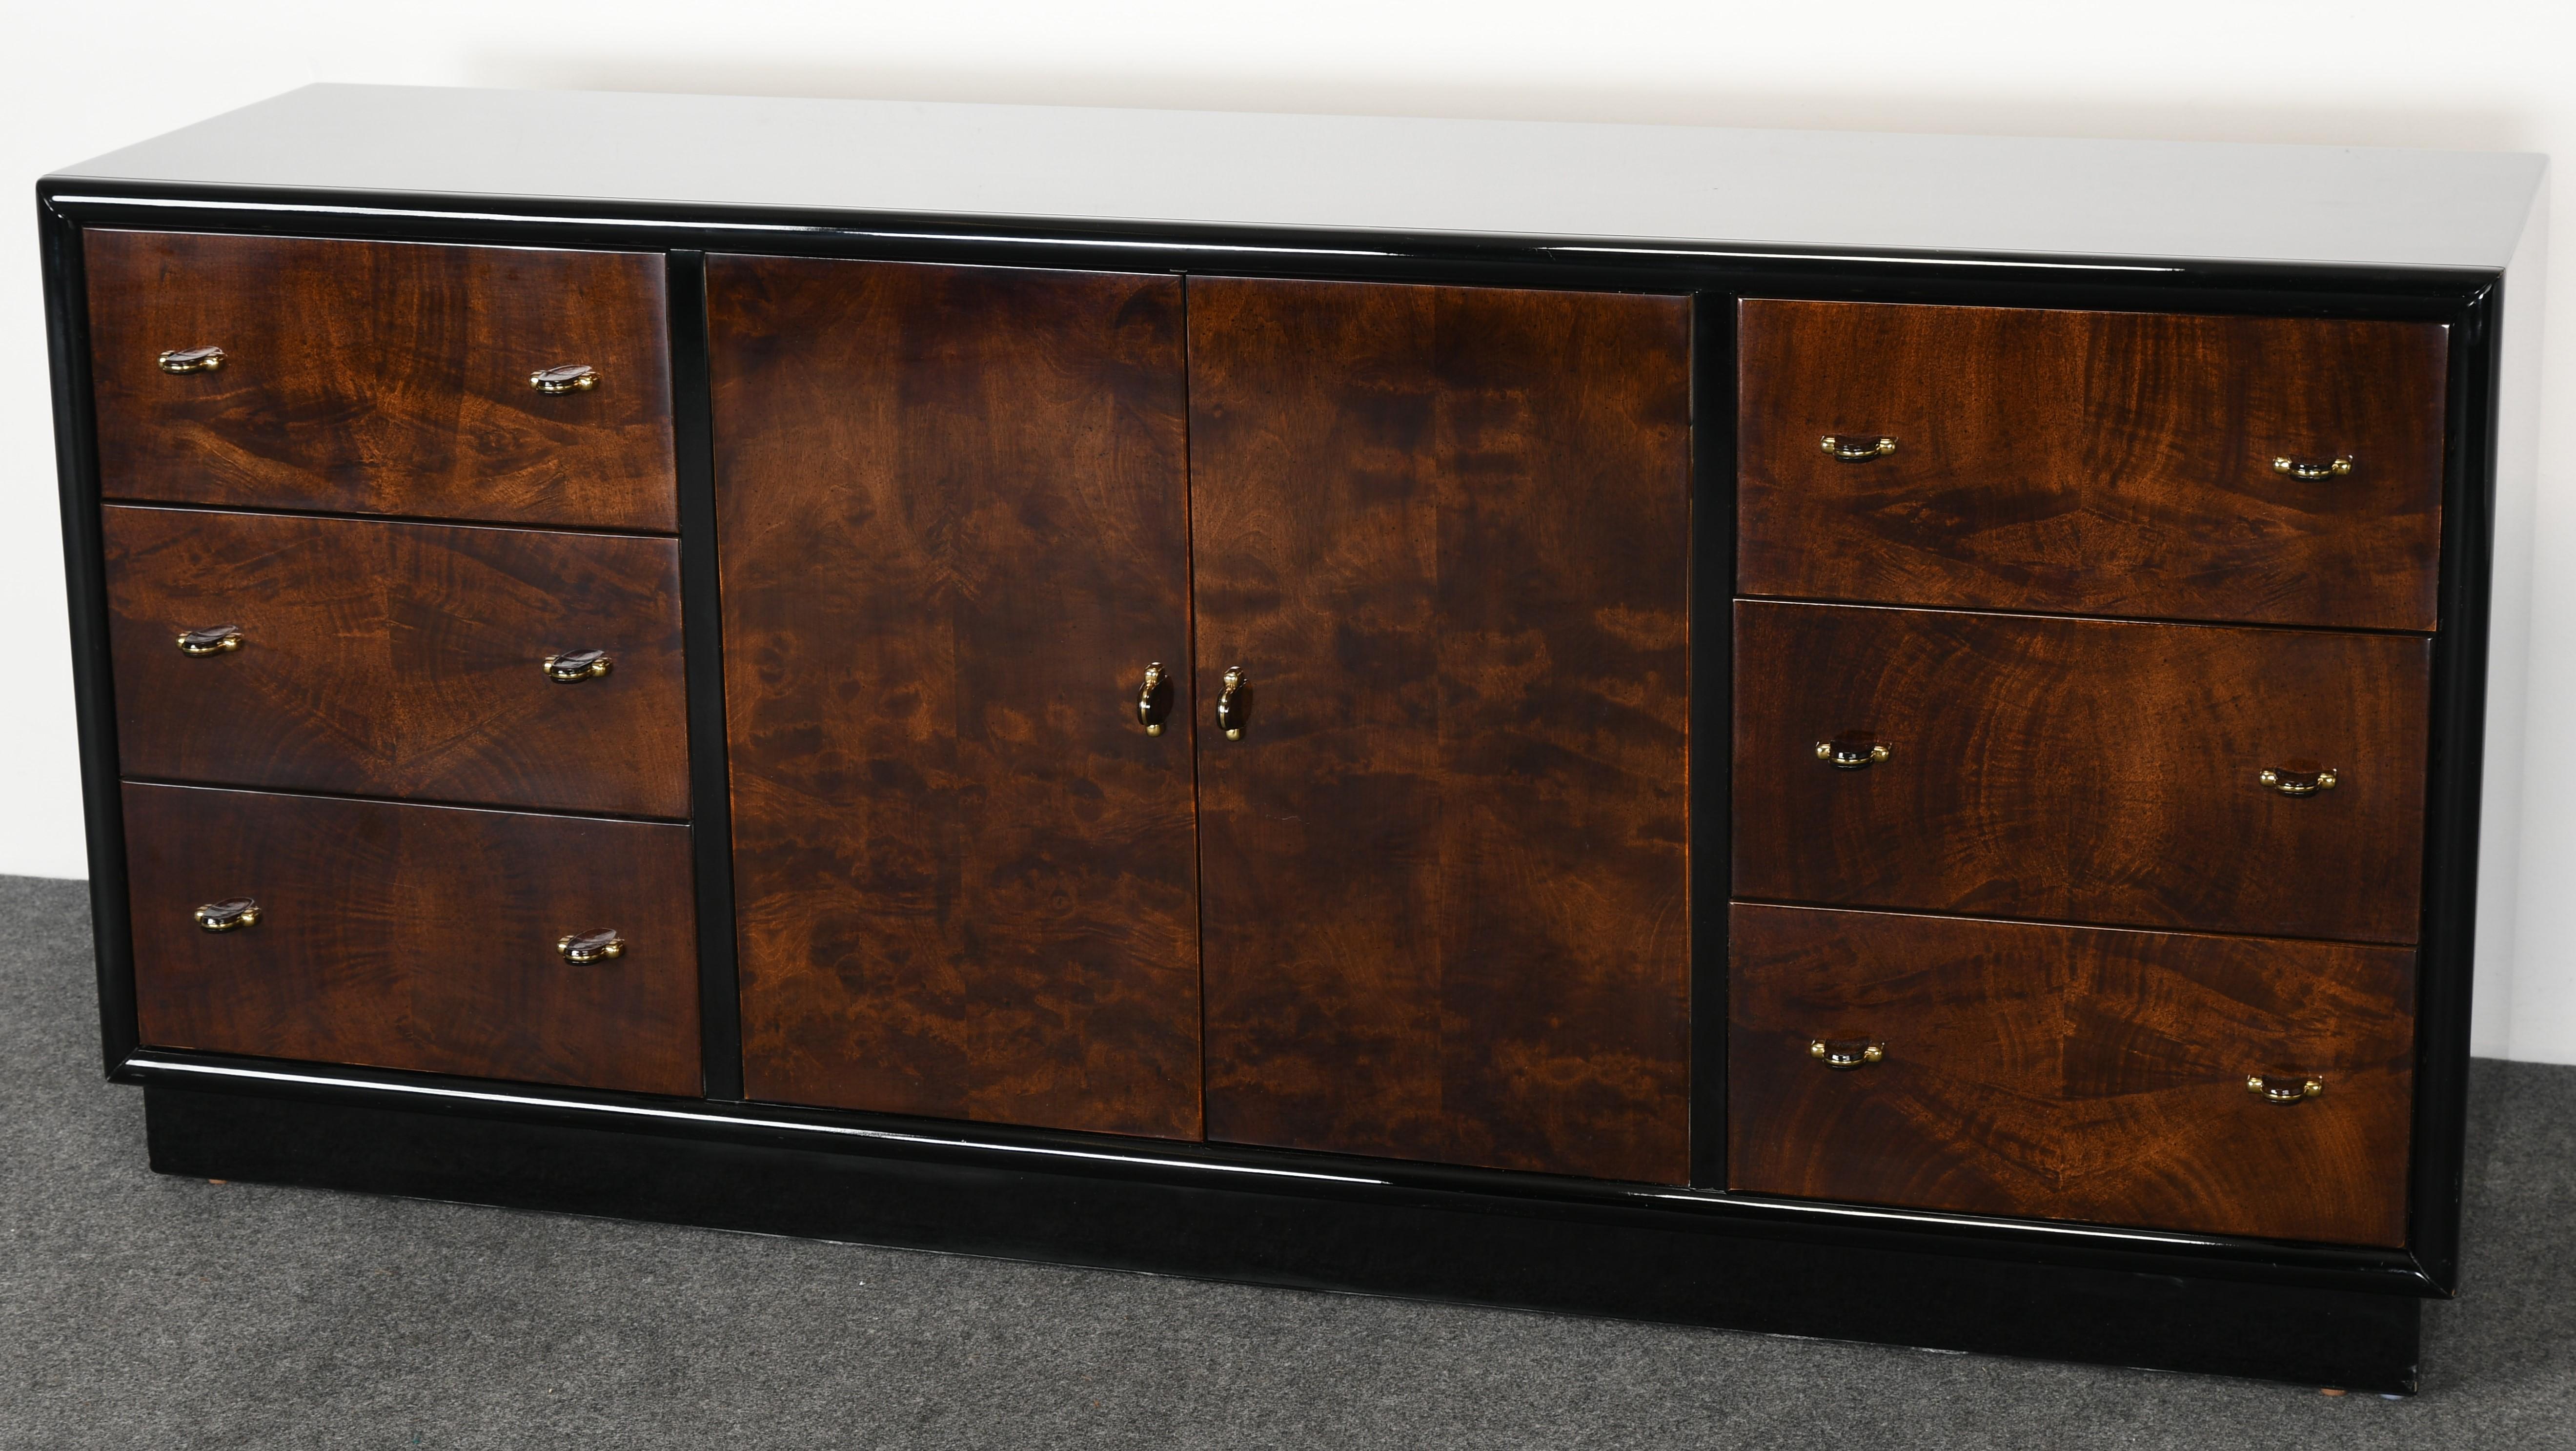 A fabulous Art Deco style credenza by Henredon scene three furniture line. This black lacquered credenza is the perfect size for an apartment or home. Labeled 